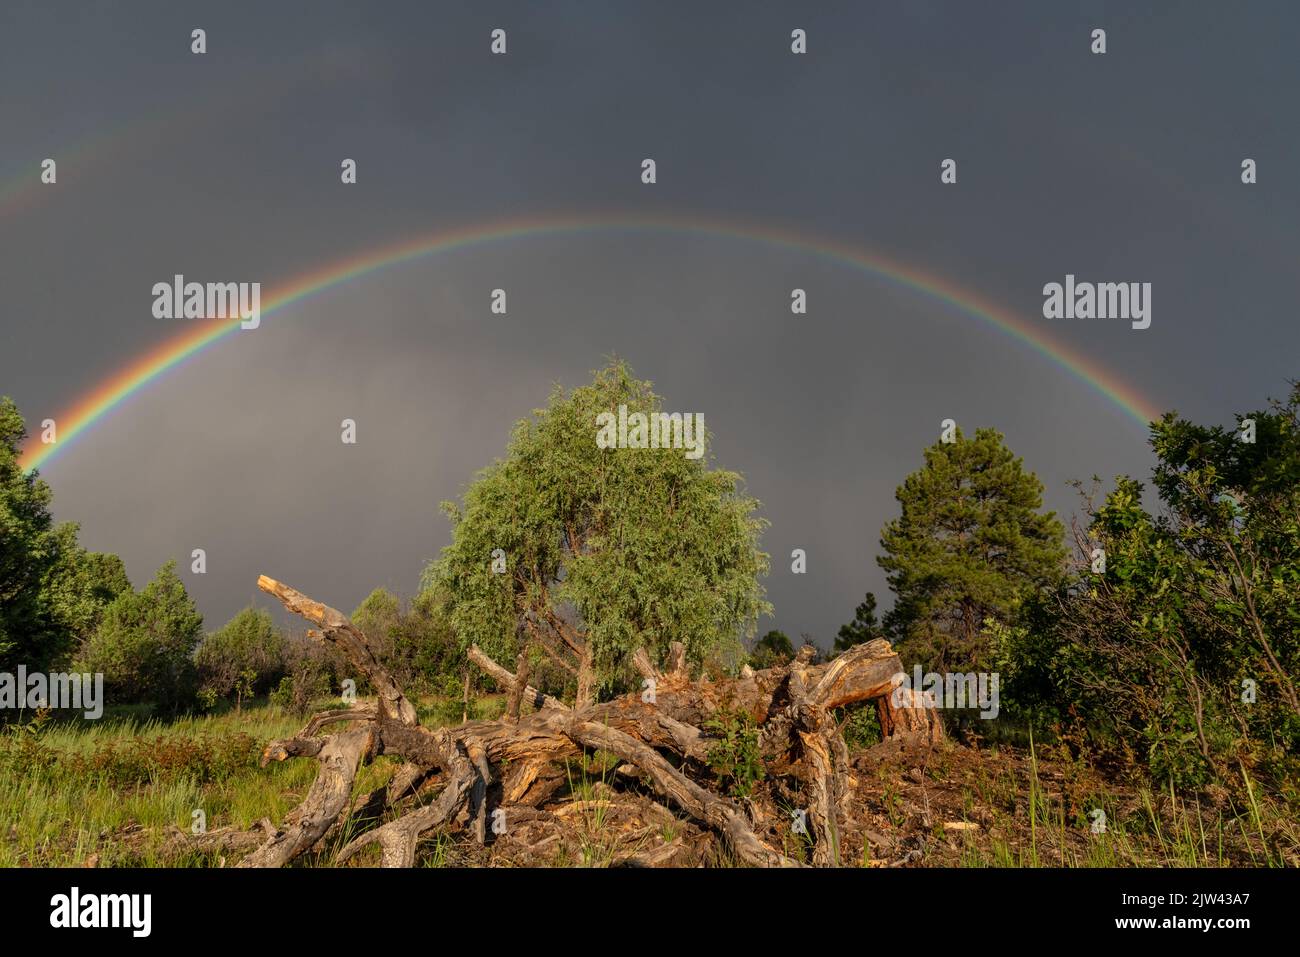 A large double rainbow in a dark sky, it’s arch over a rural landscape, in the center a juniper tree and fallen pine tree lit by the morning light. Stock Photo